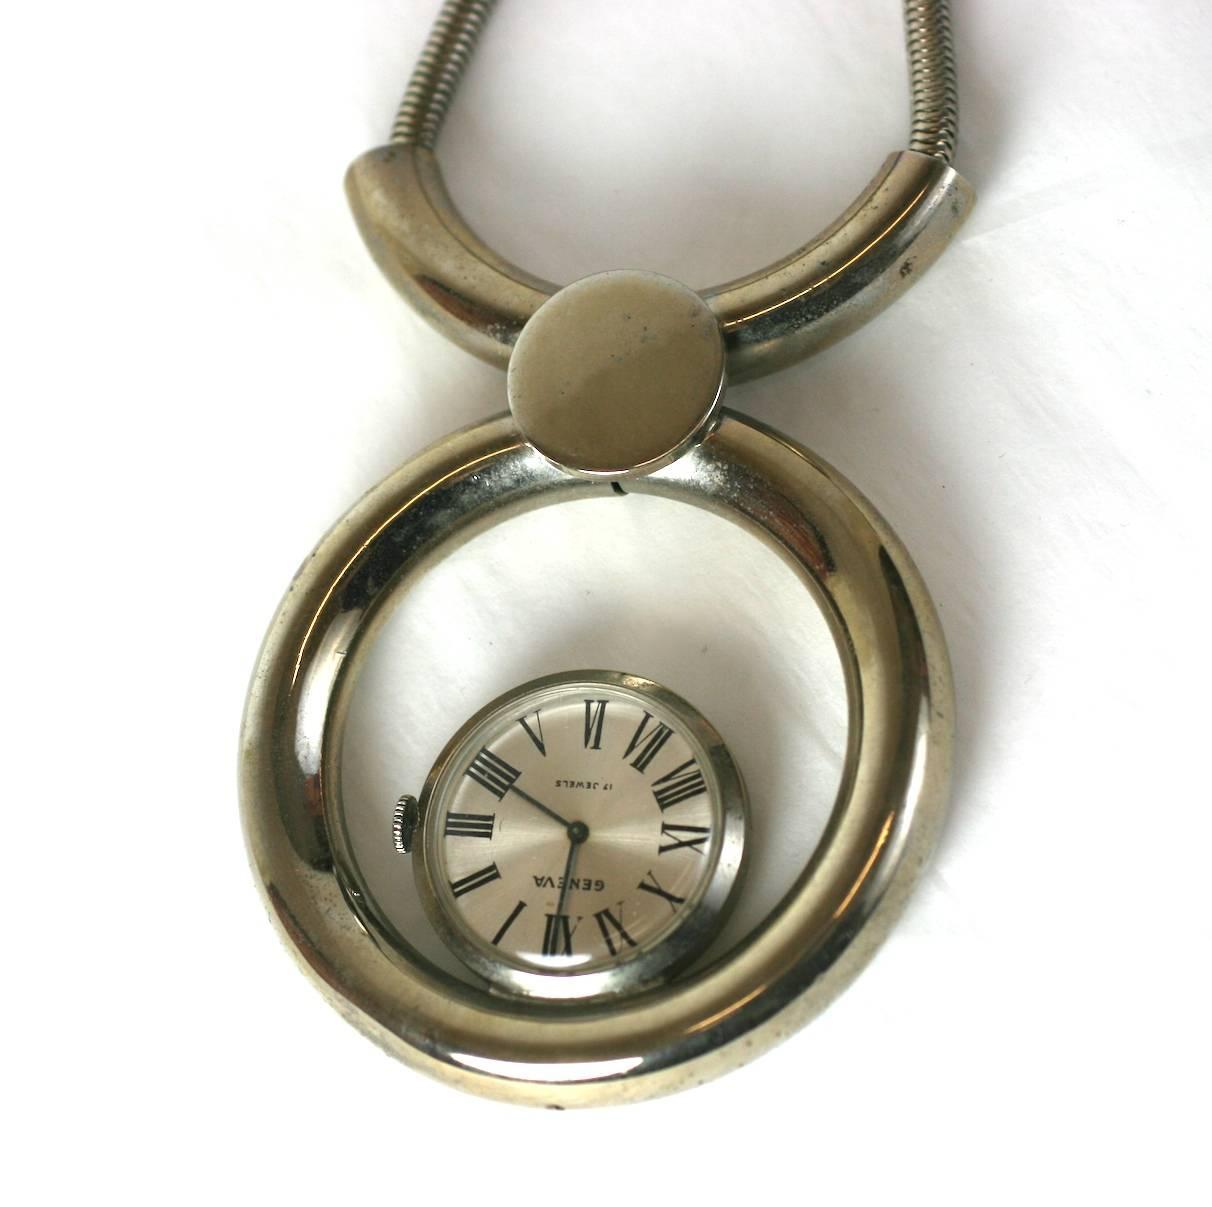 Large Mod Swiss Pendant Watch necklace made circa 1960's, Switzerland. Chrome metal tubing forms pendant with floating watch held by a thick silver snake chain. 1960's Swiss. Excellent condition. 
Chain 24